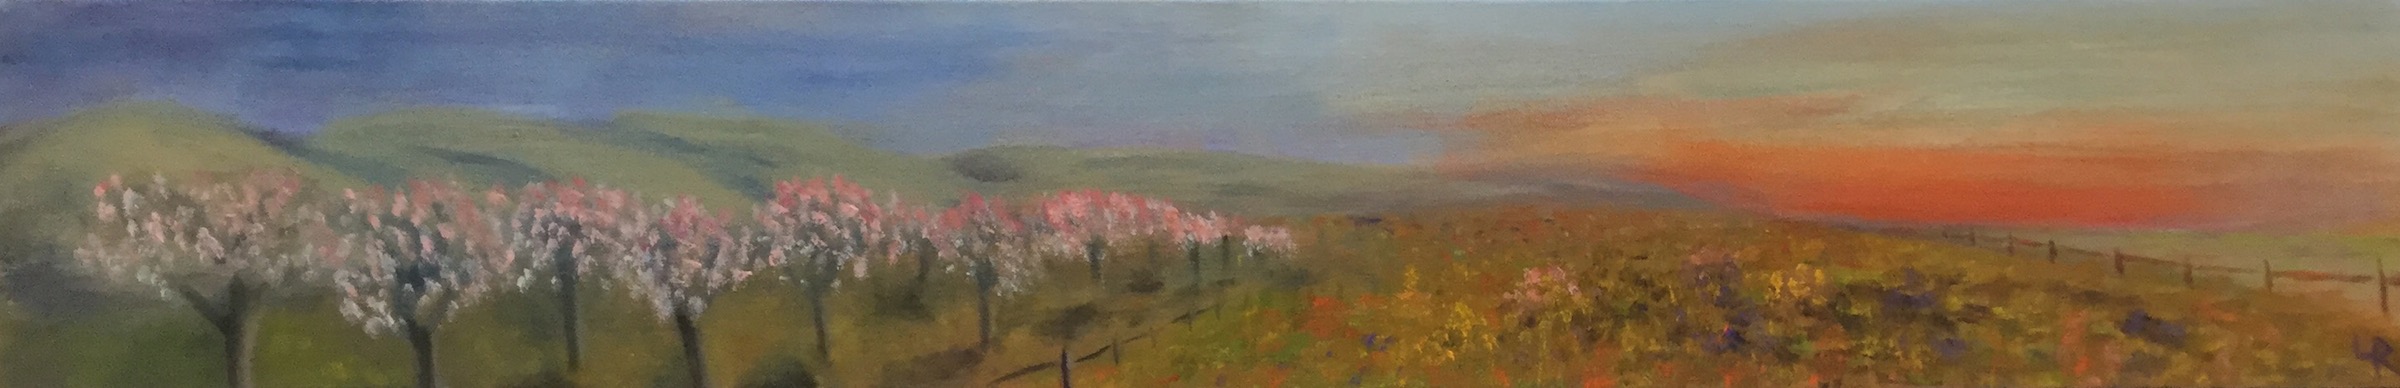   The promise of apples   36” x 6”   Sold  